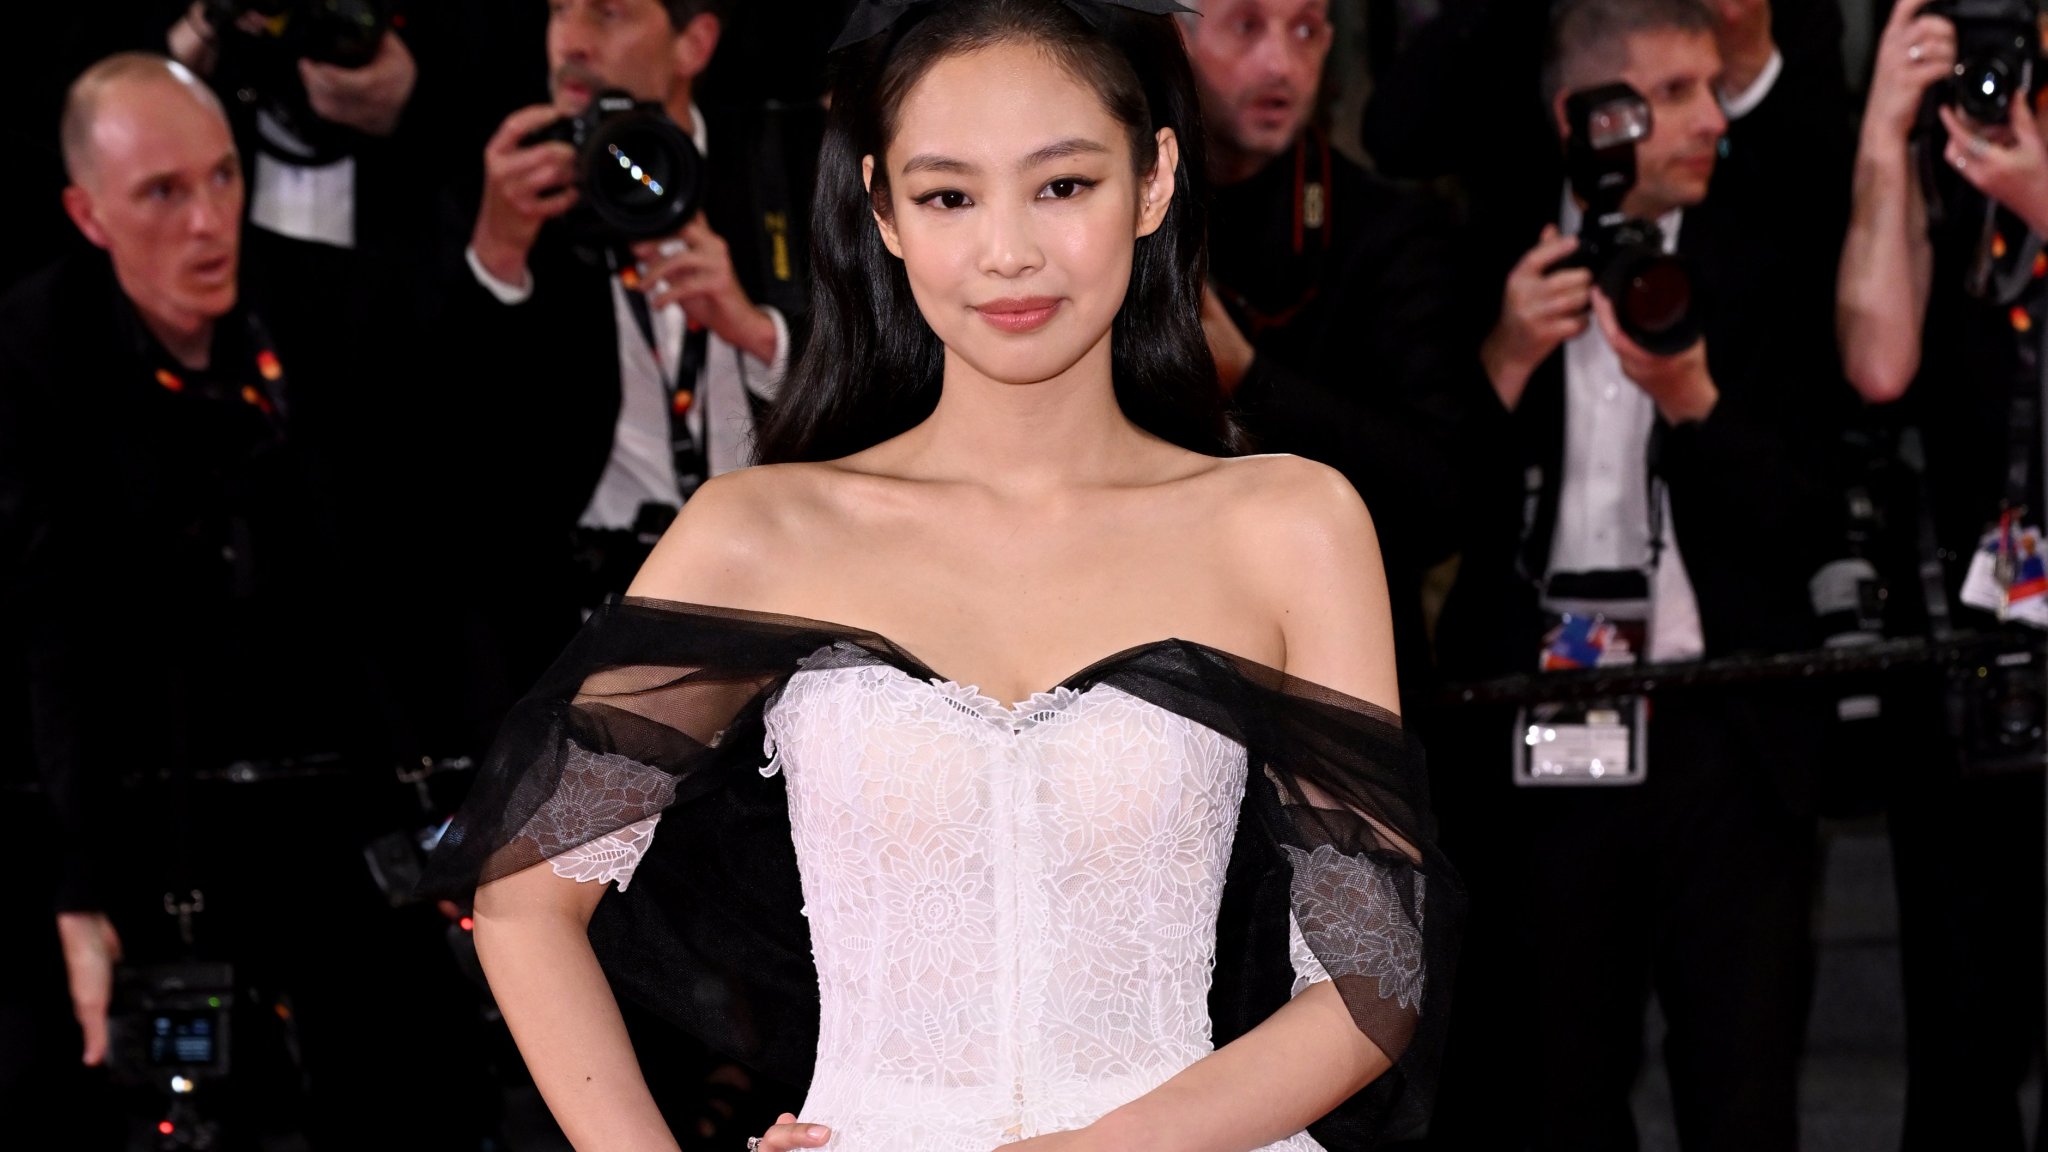 Blackpink's Jennie wore Chanel for her first Cannes Film Festival